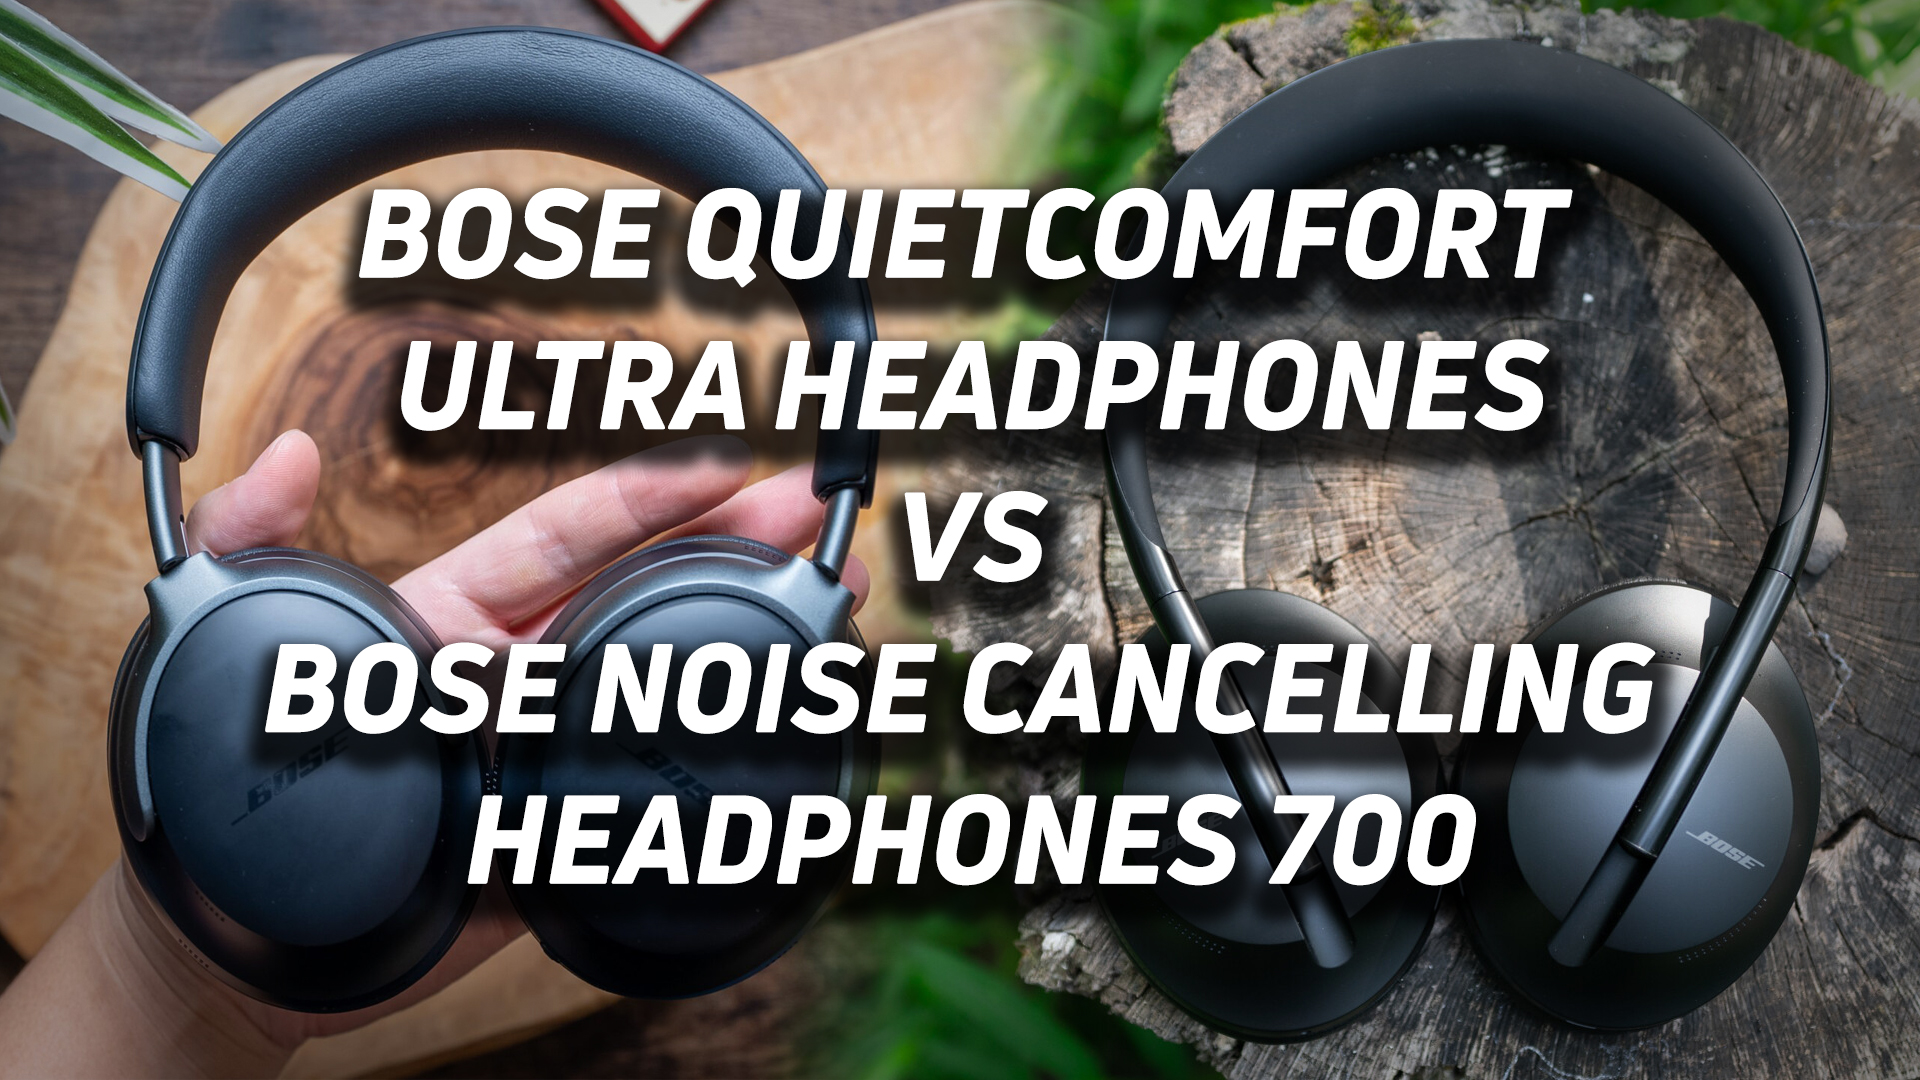 Using the buttons and touch controls - Bose QuietComfort Ultra Headphones